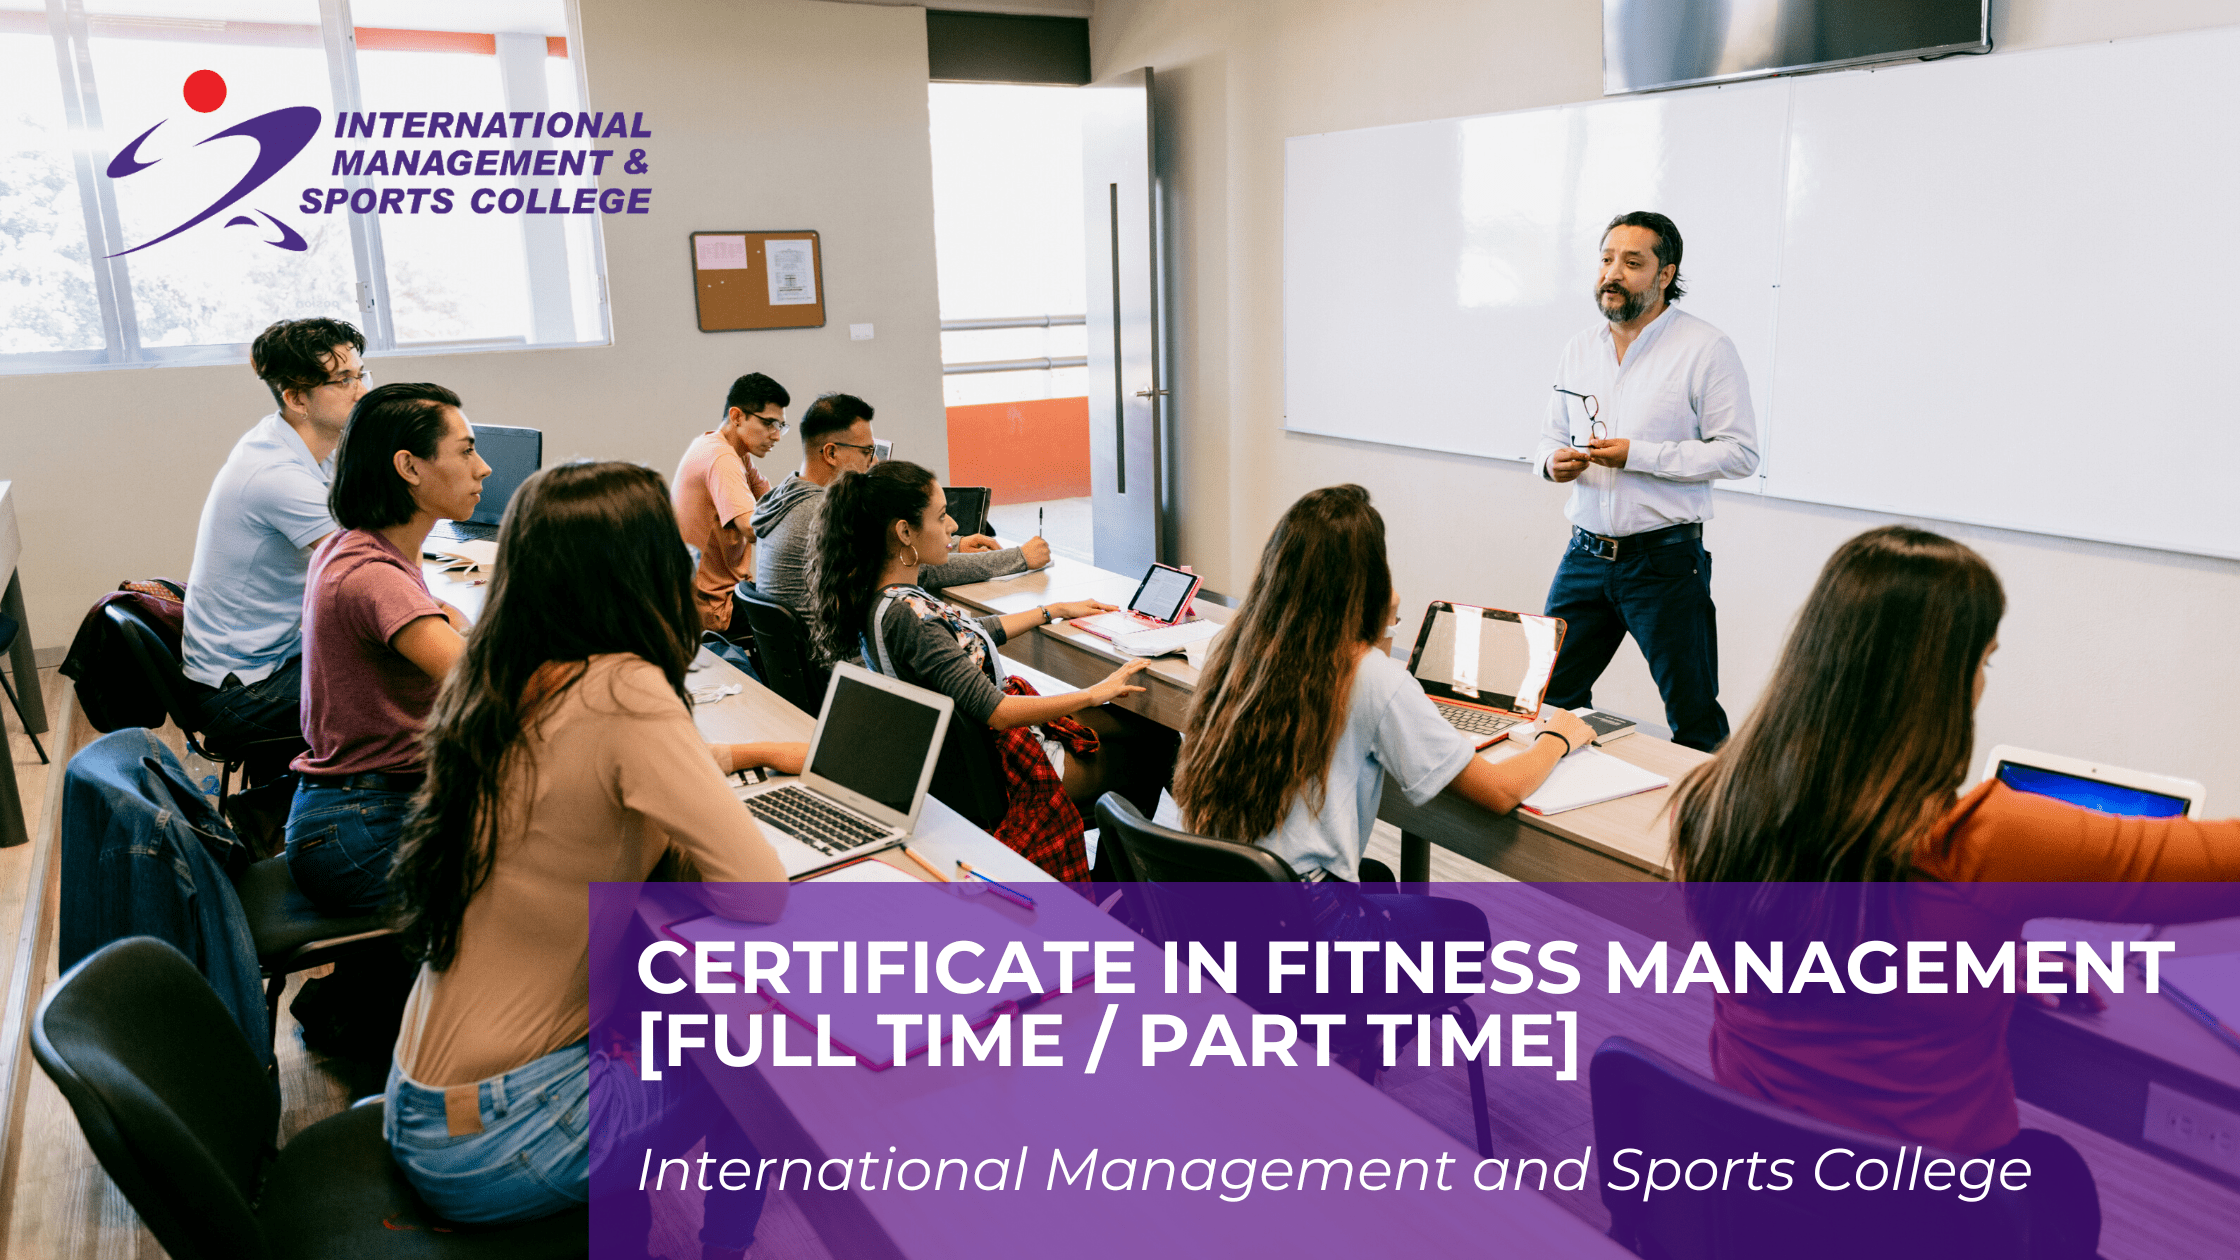 Diploma in Sports Science and Coaching